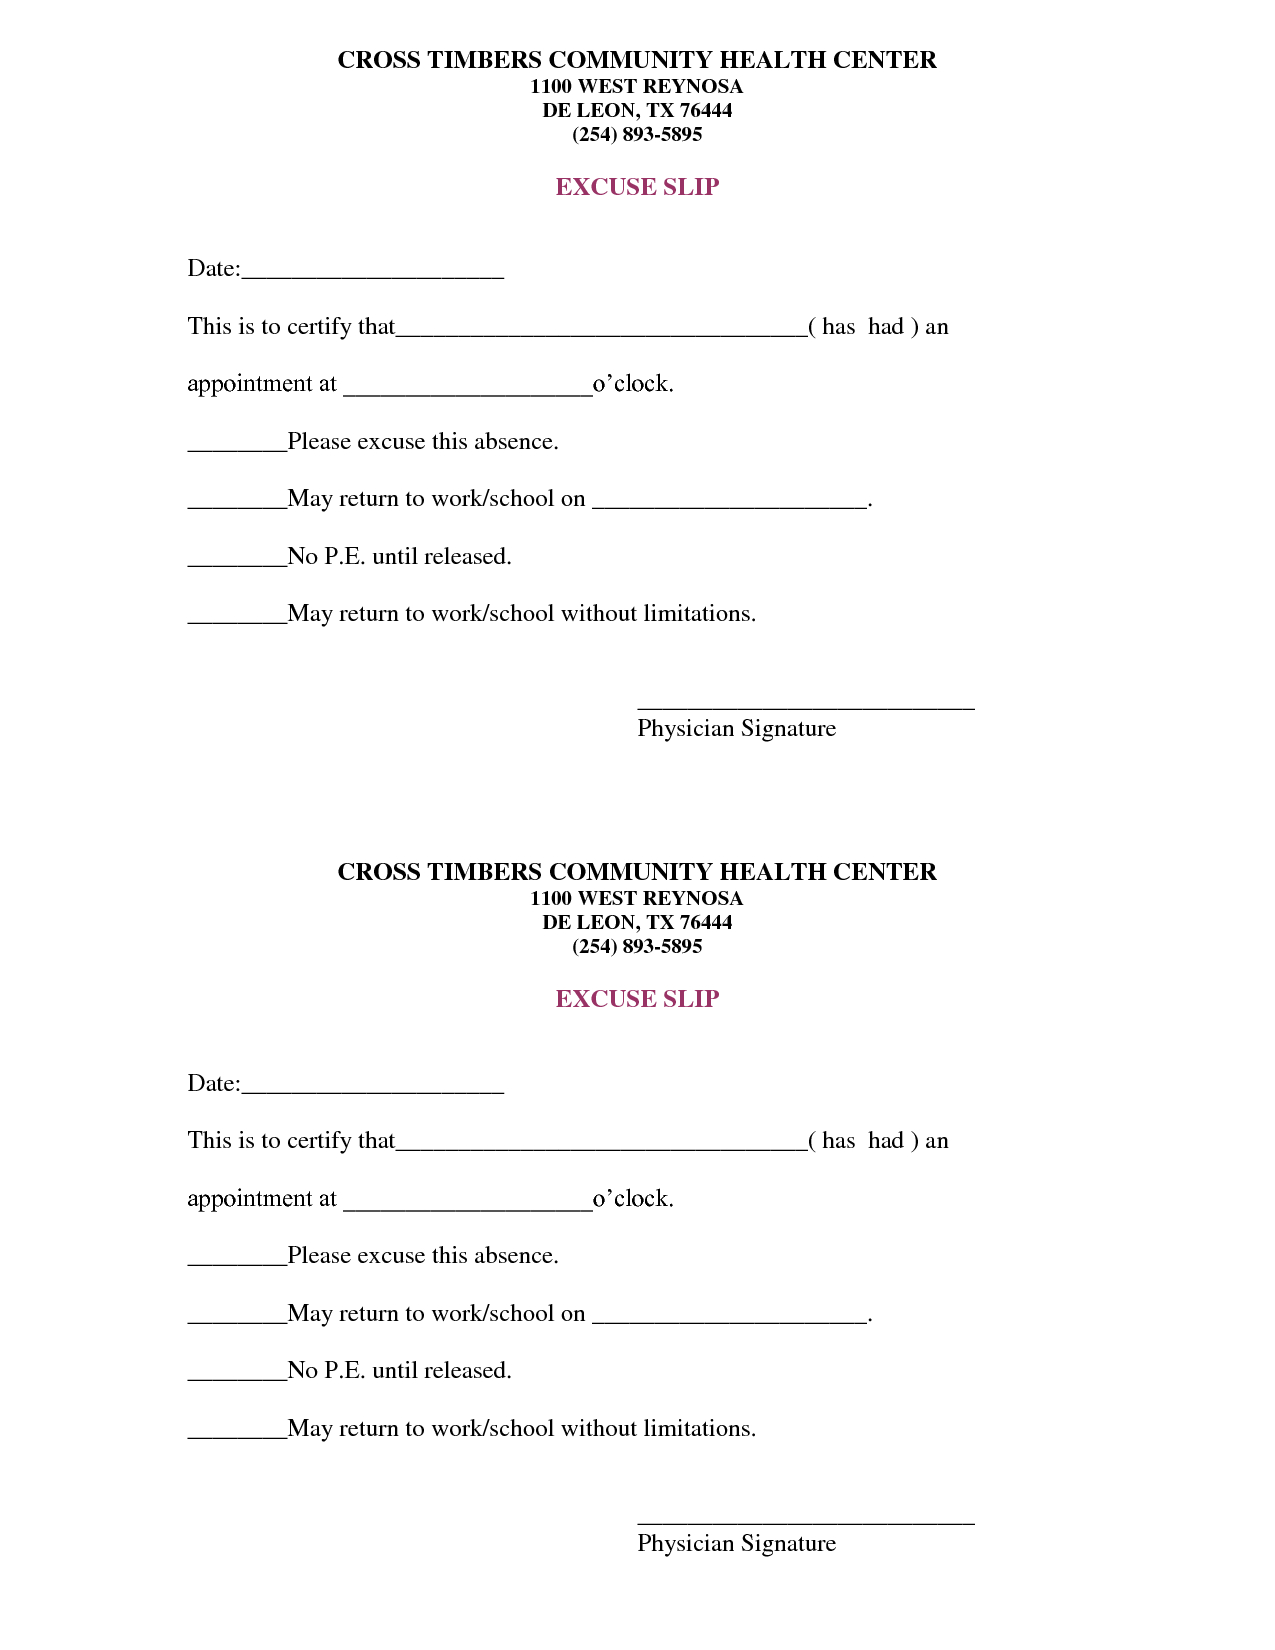 Free Doctors Note Template | Scope Of Work Template | On The Run - Free Printable Doctors Excuse For Work